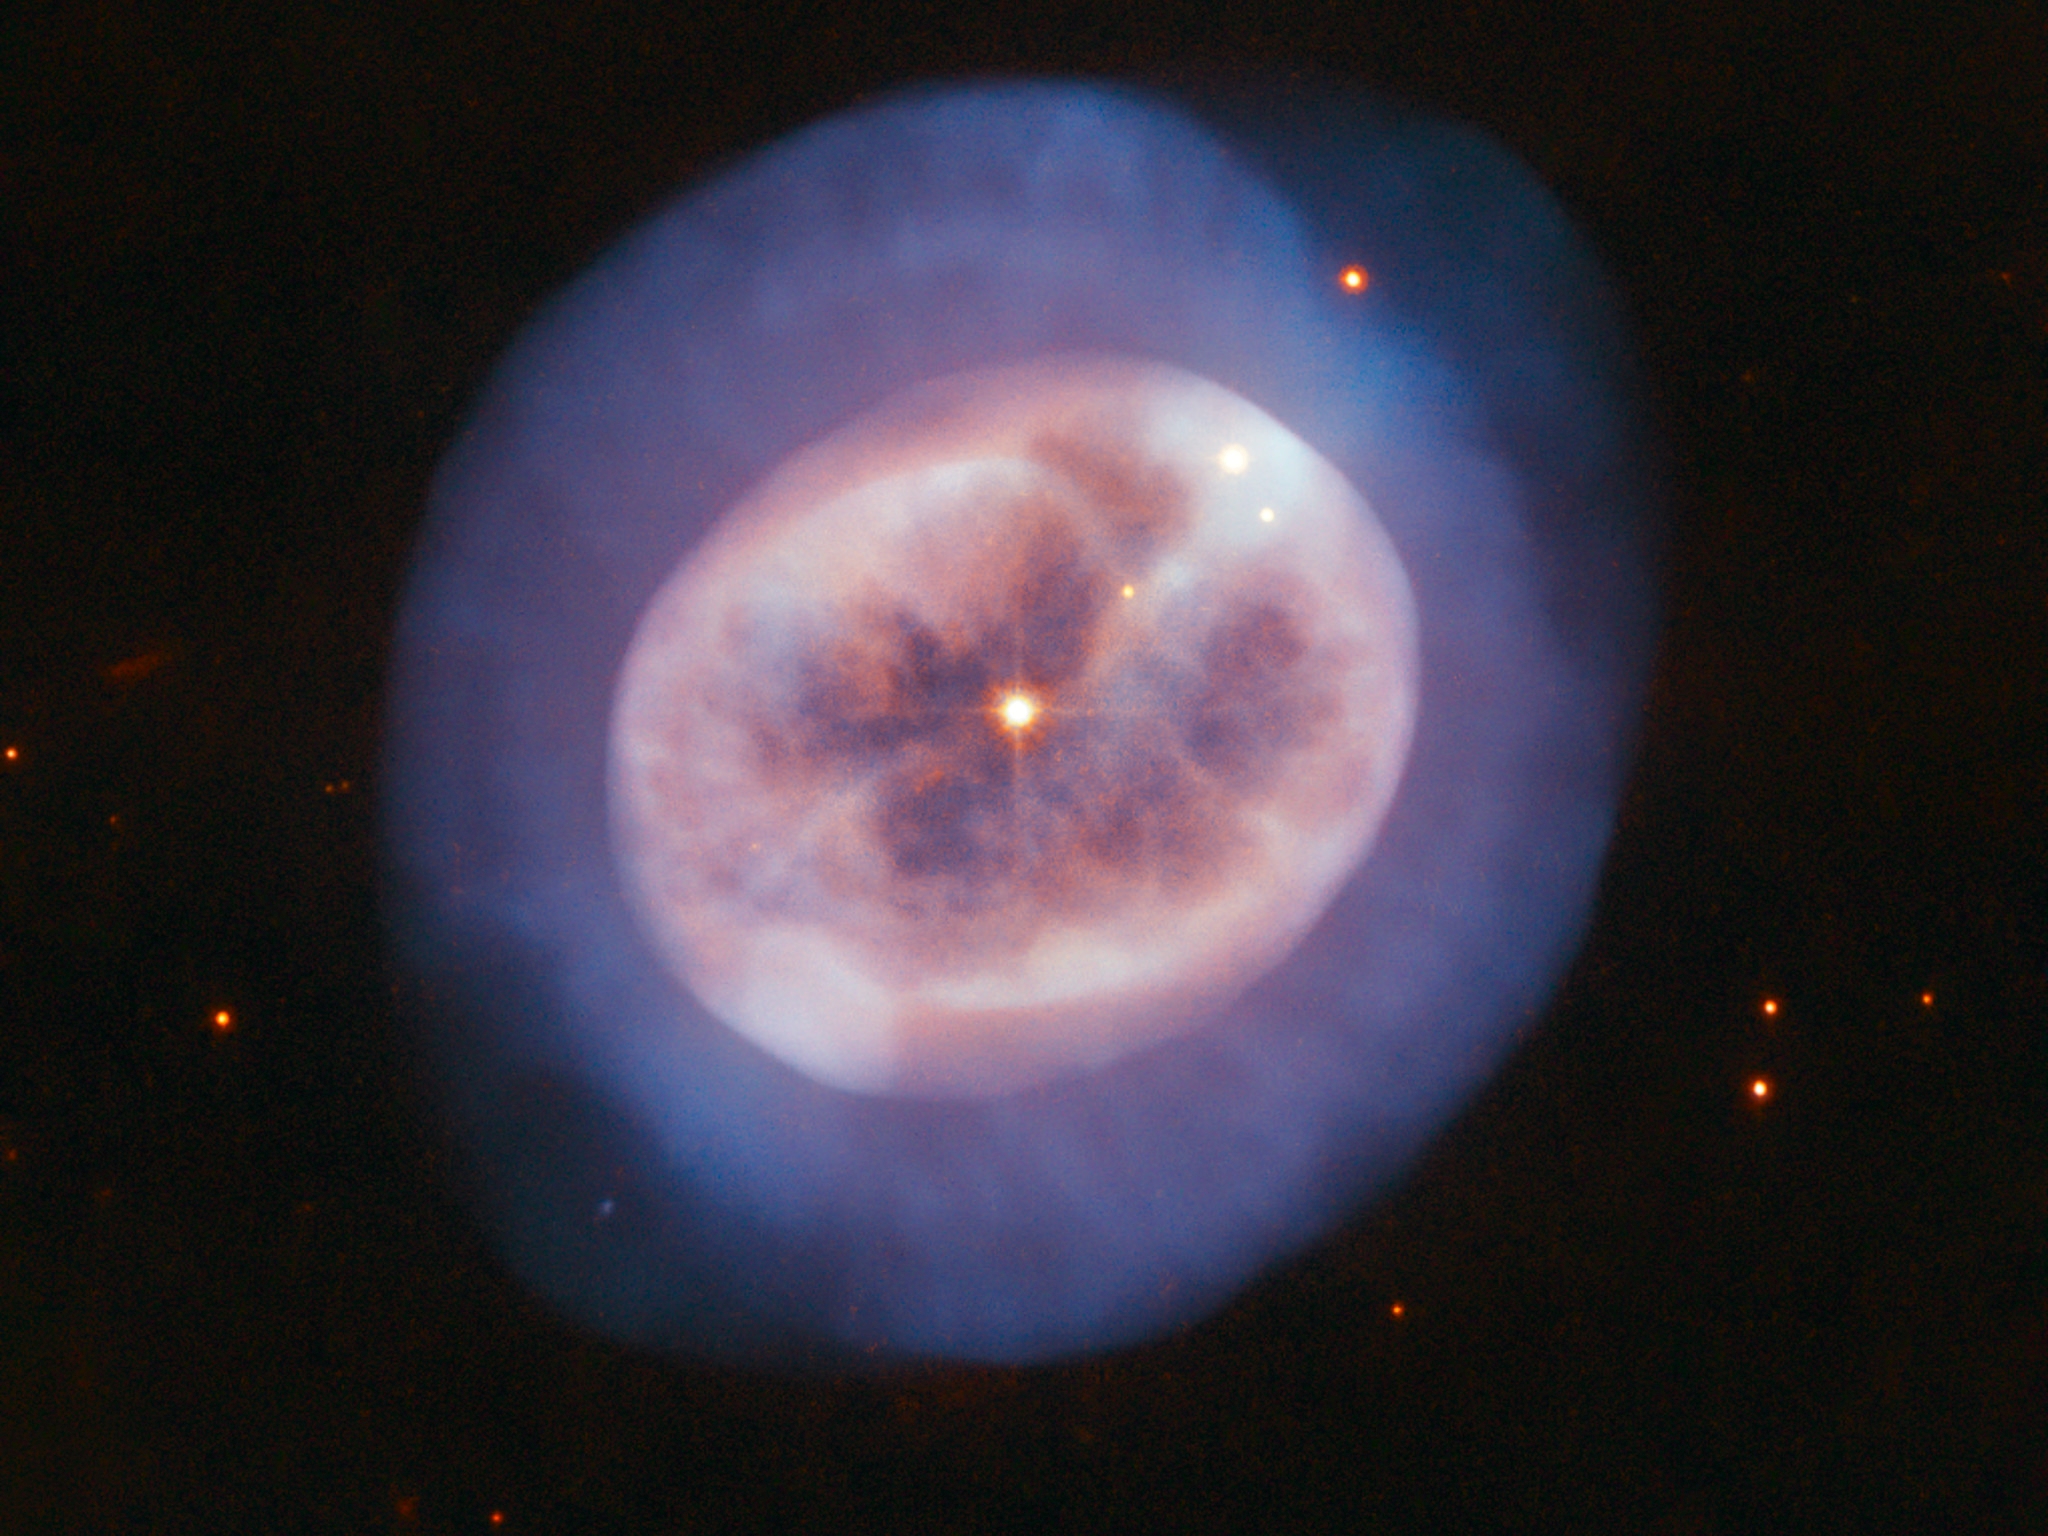 GODMOTHER. The new STUNNING Image that STUNNED ALL of Mankind star